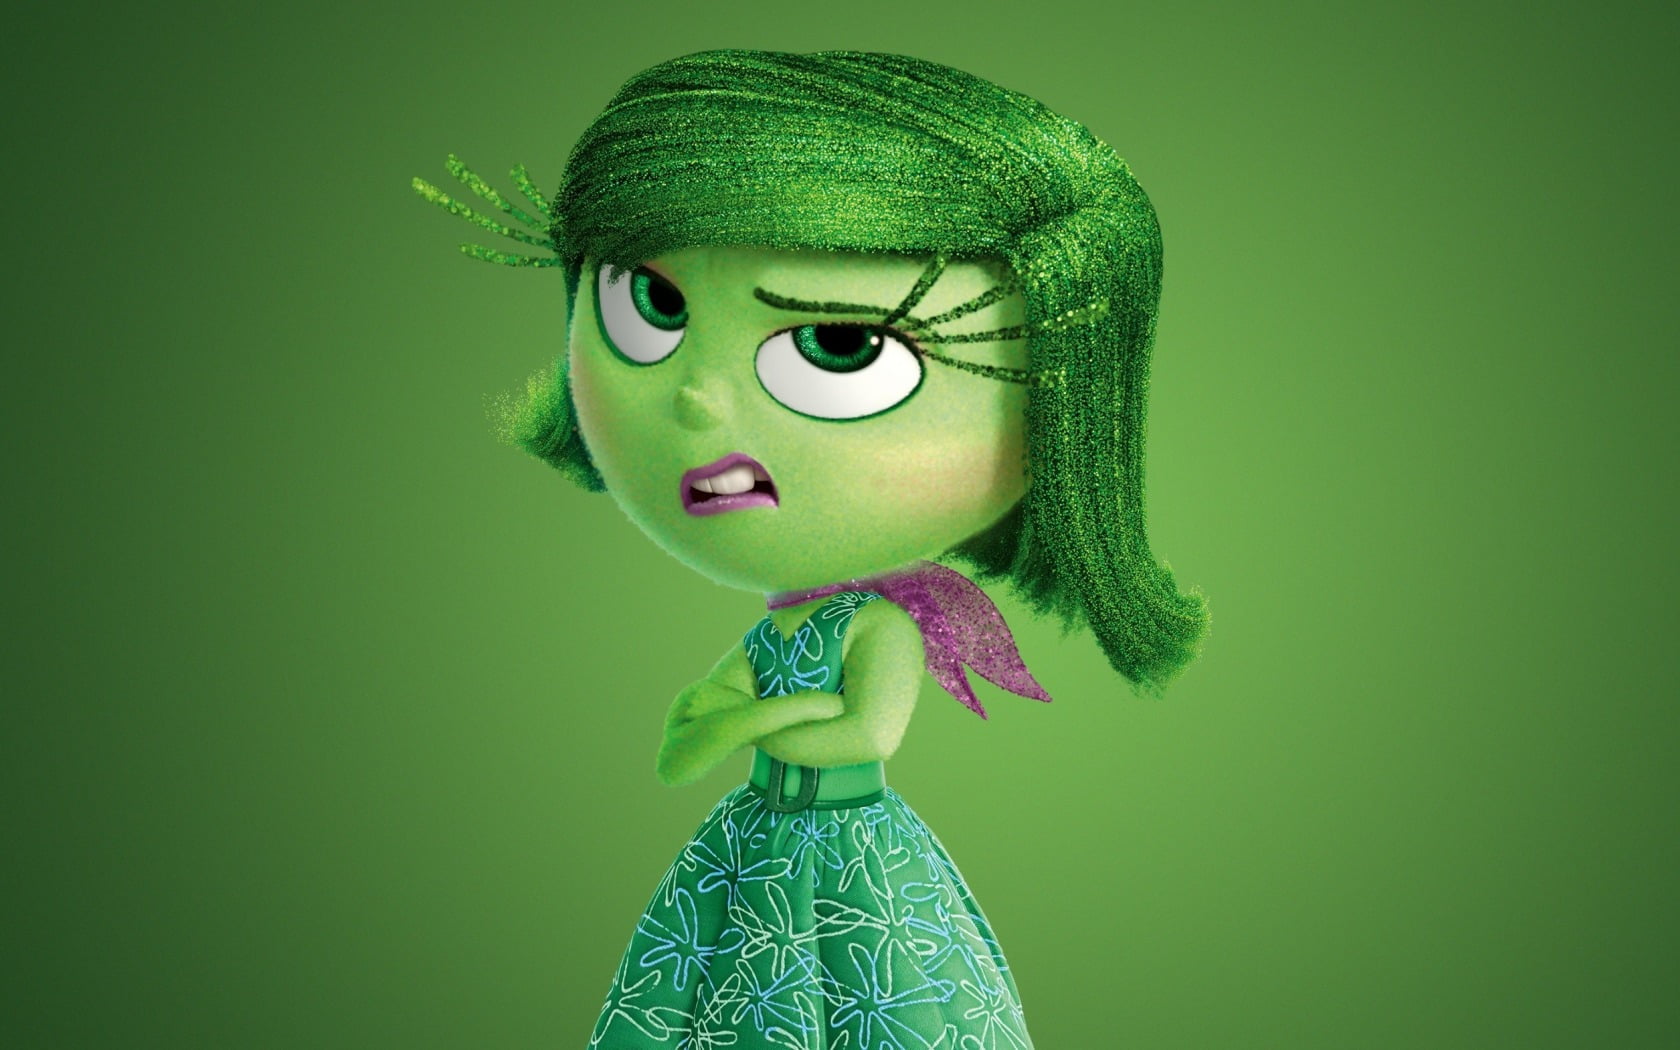 Inside Out Disgust with green background